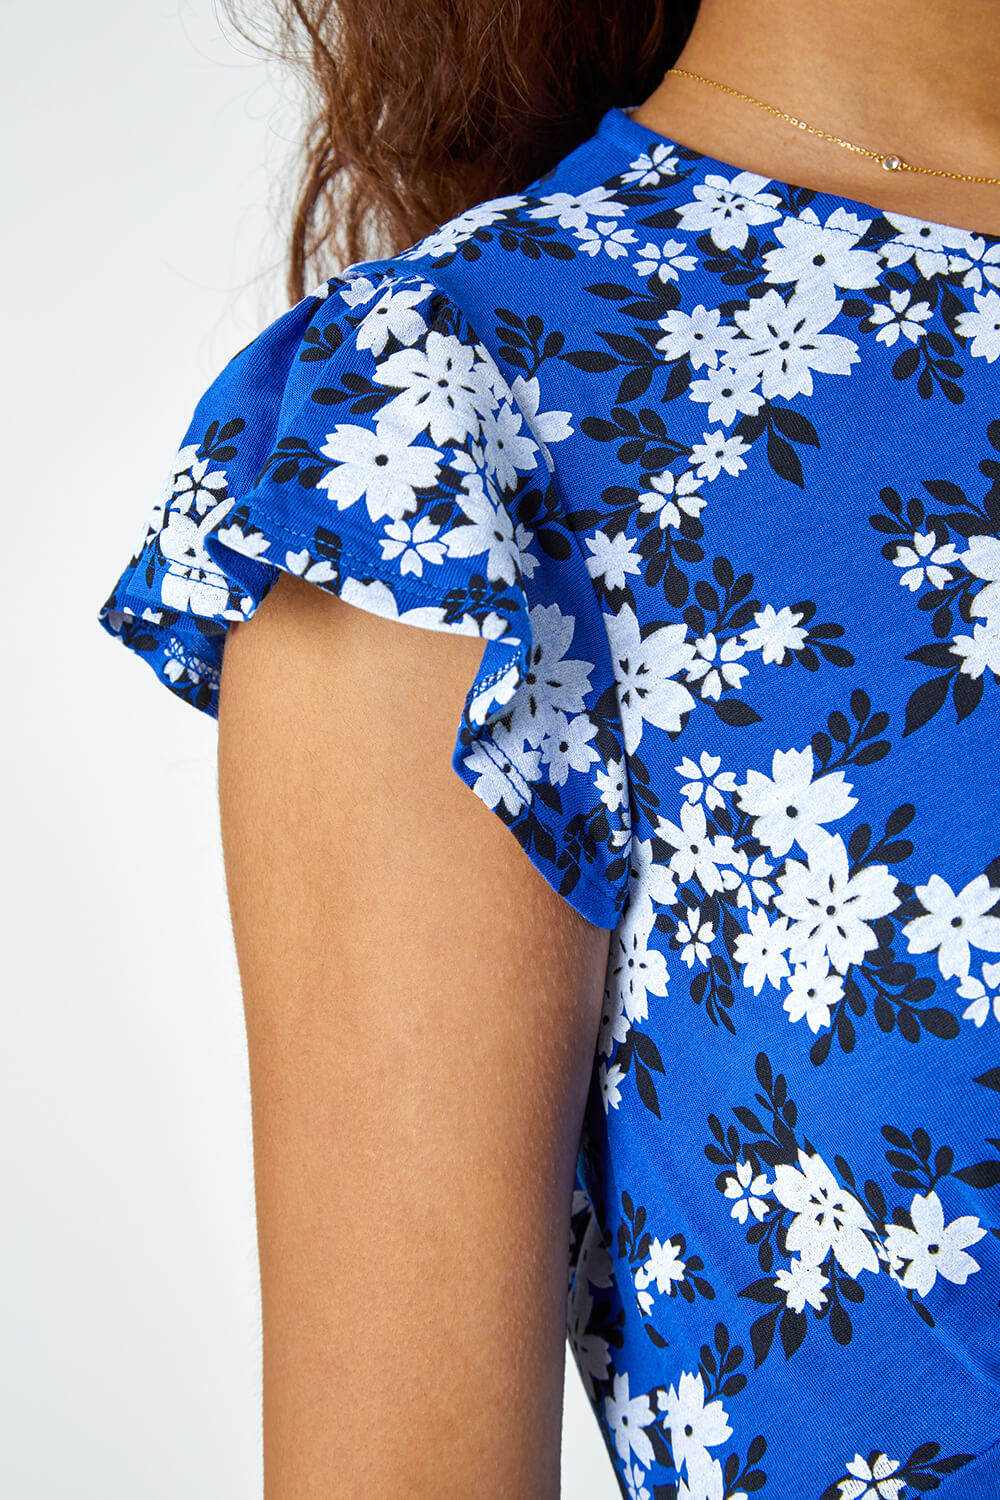 Royal Blue Floral Print Frill Sleeve Stretch Dress, Image 5 of 5